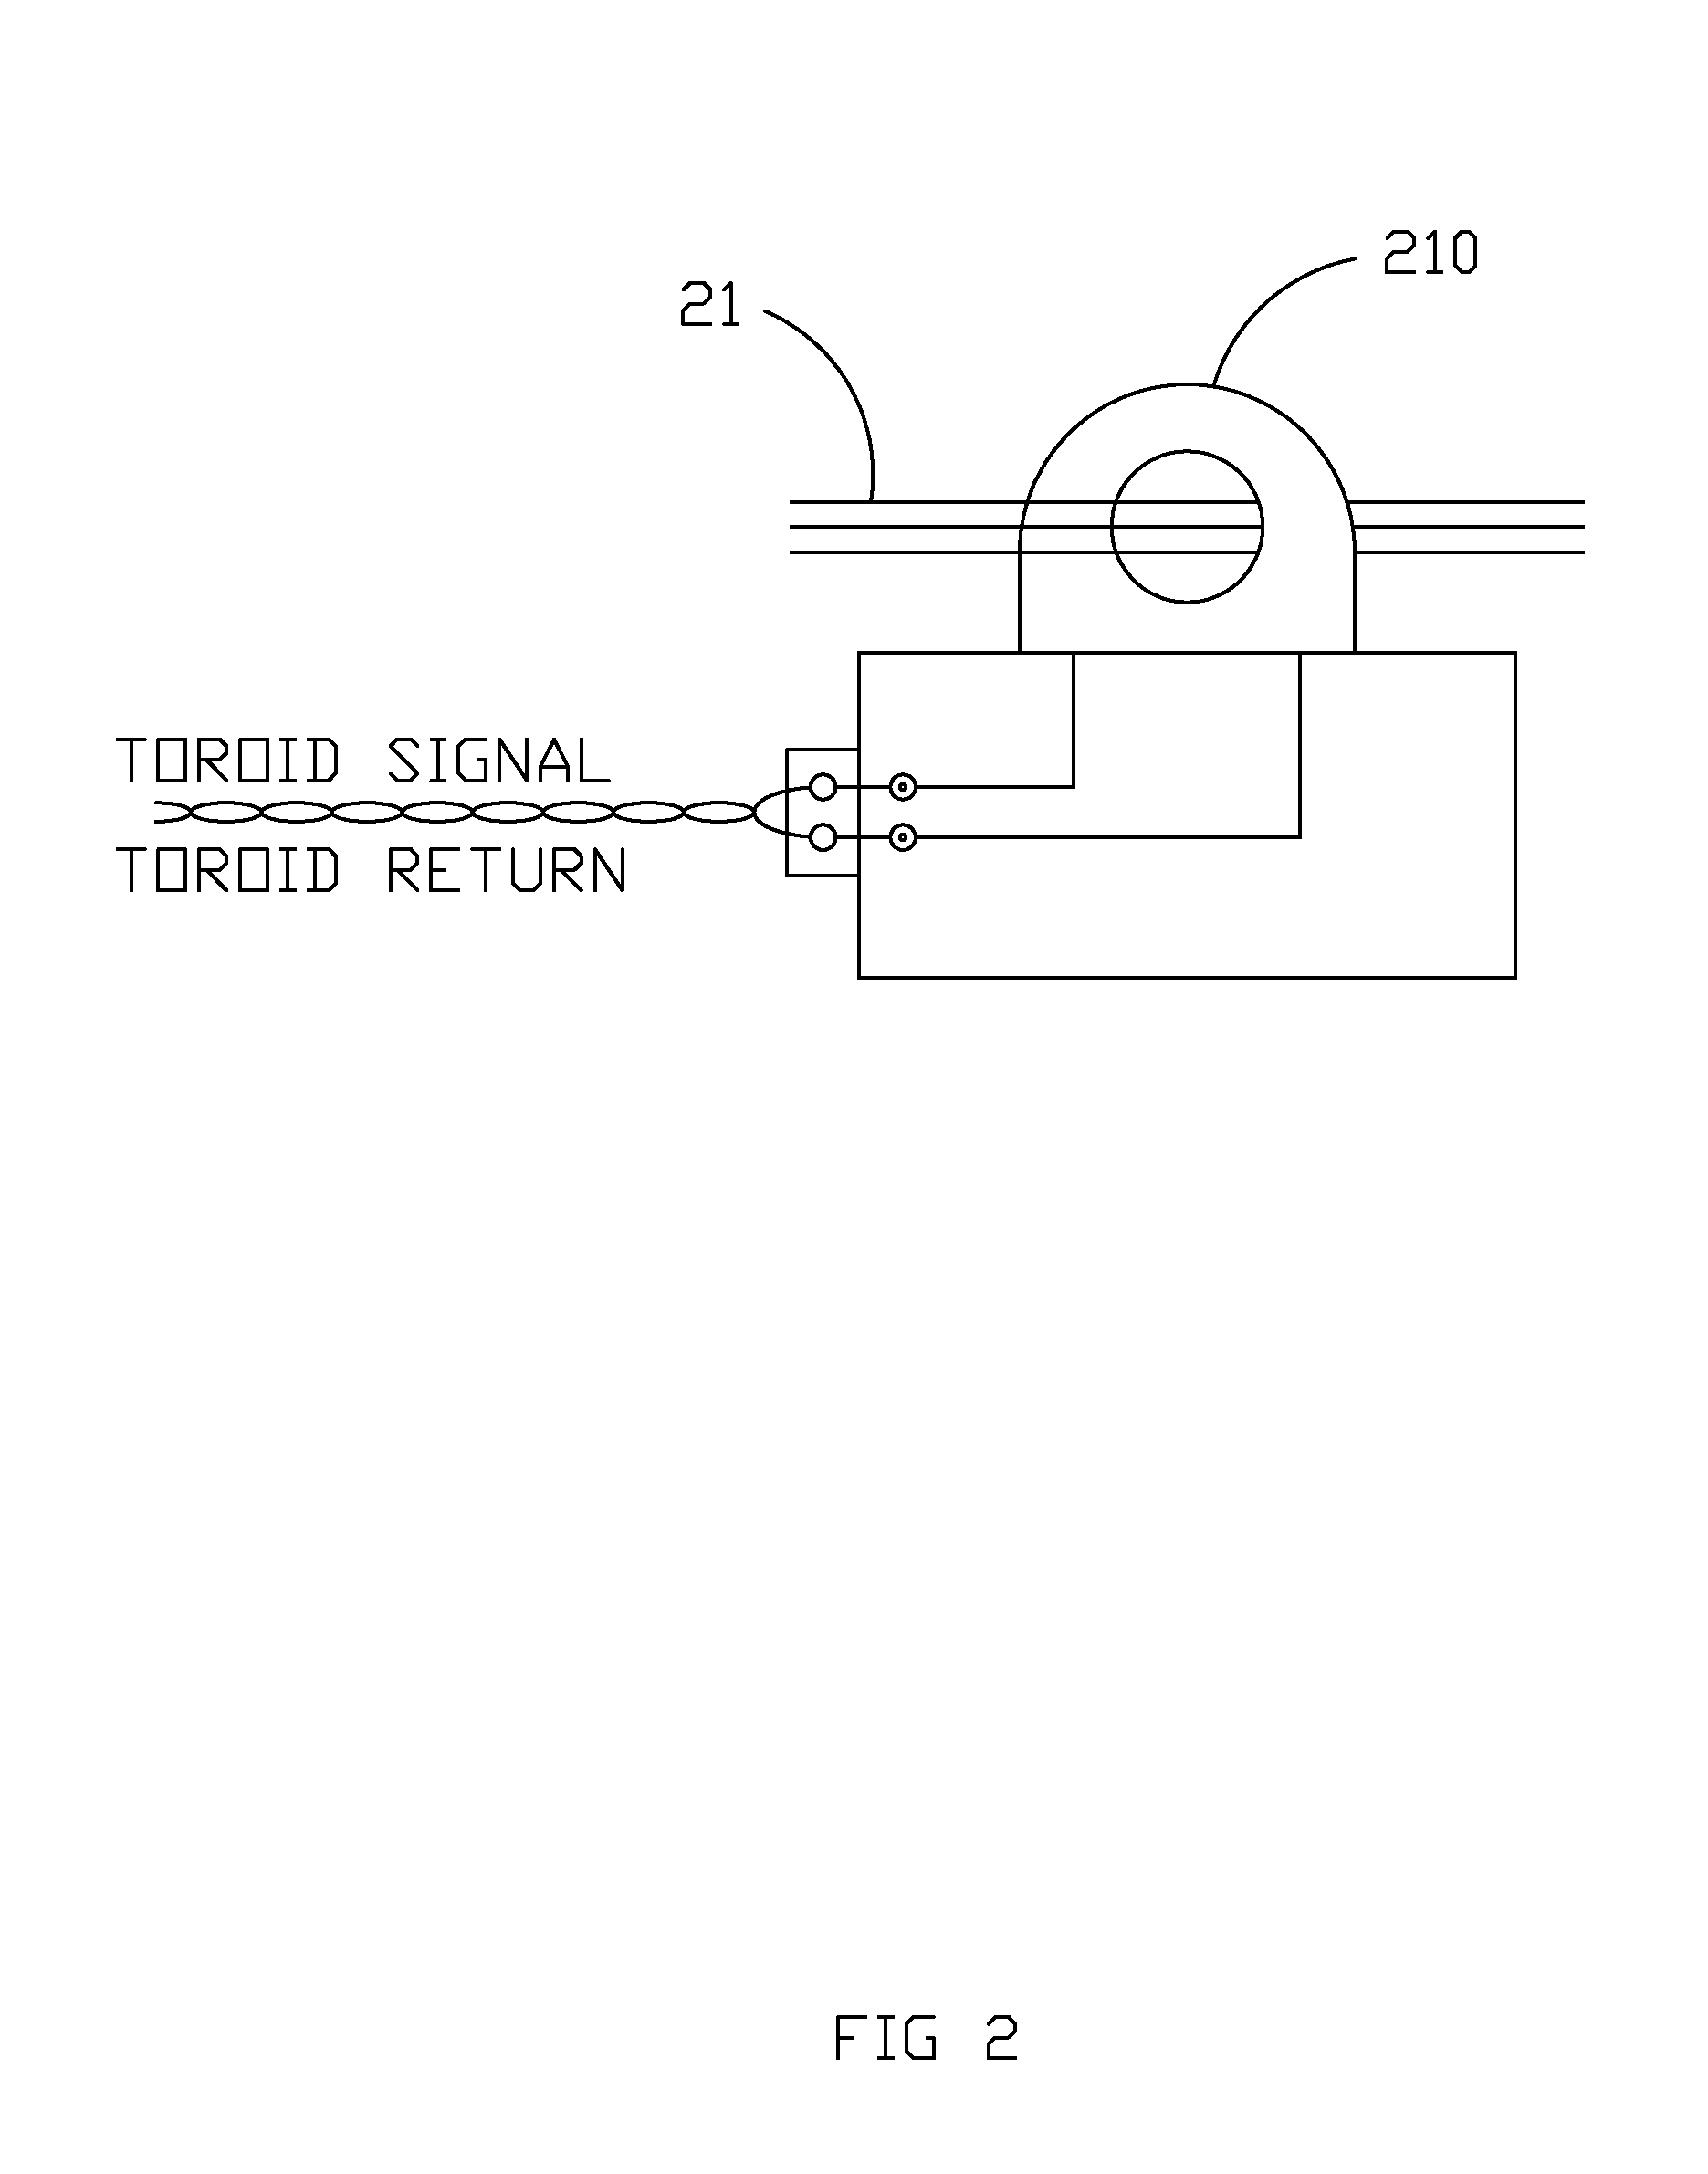 Apparatus, method, and system for monitoring  leakage current and detecting fault conditions  in electrical systems